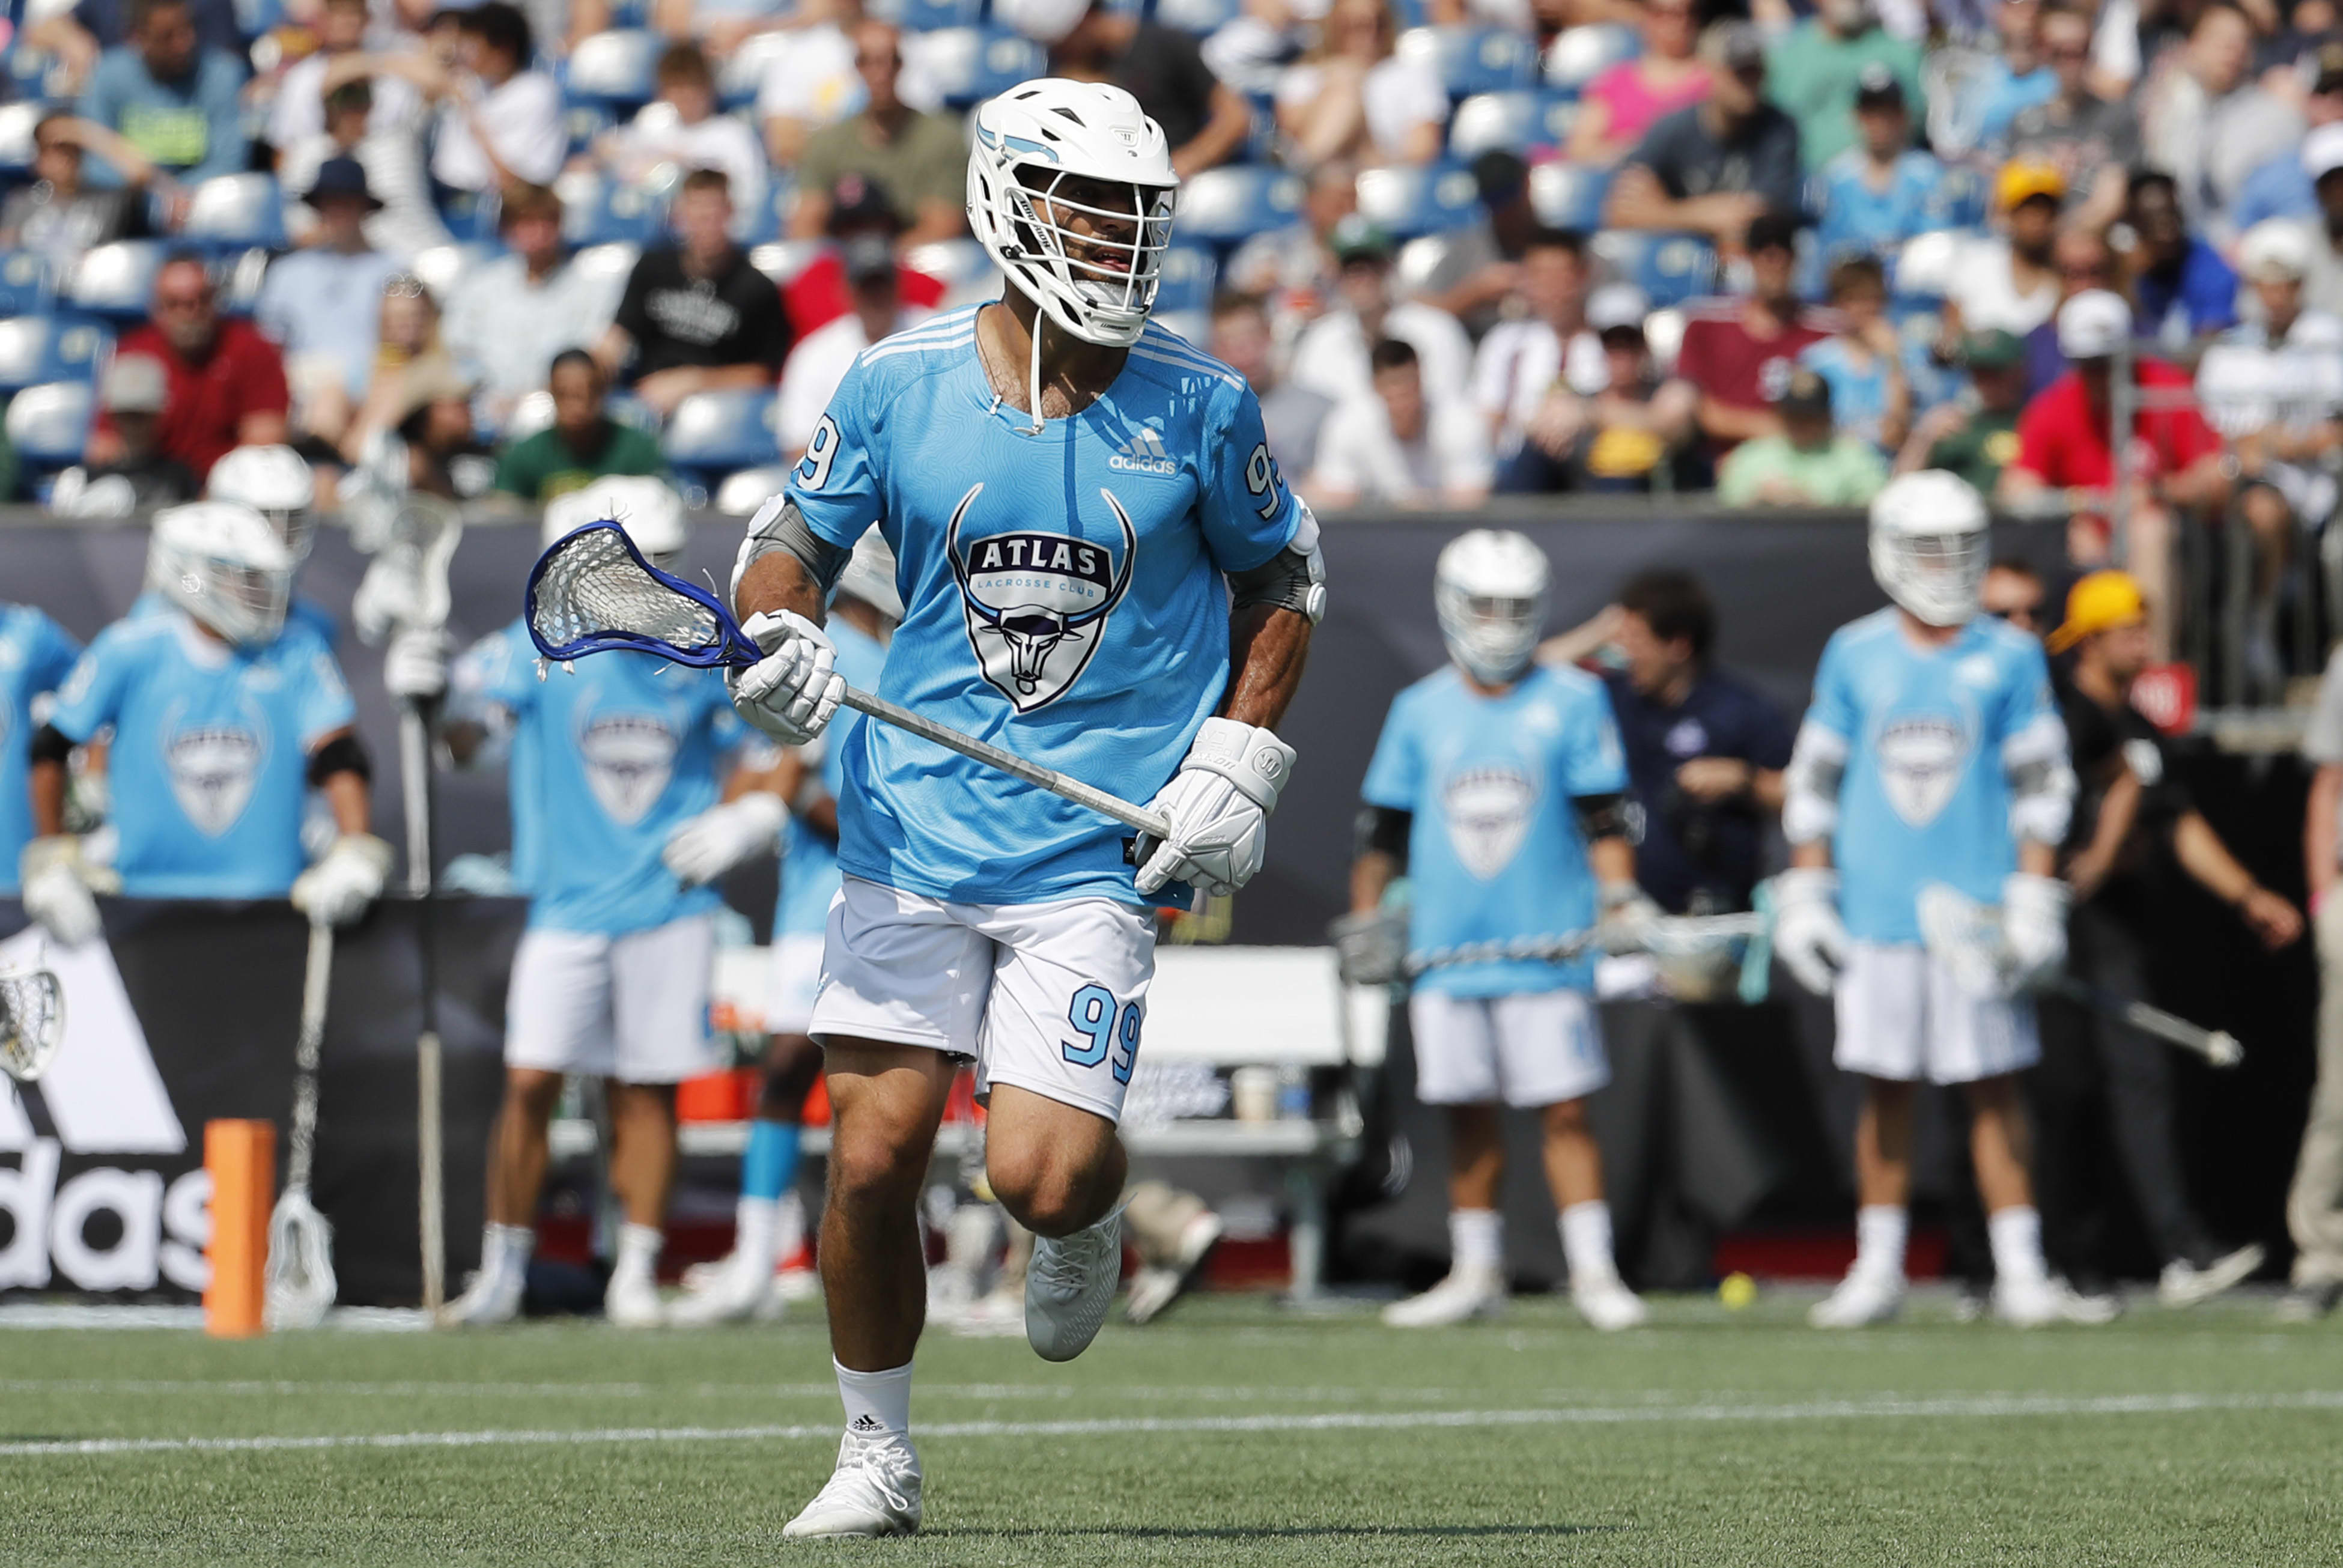 What I learned and saw at the Premier Lacrosse League All-Star